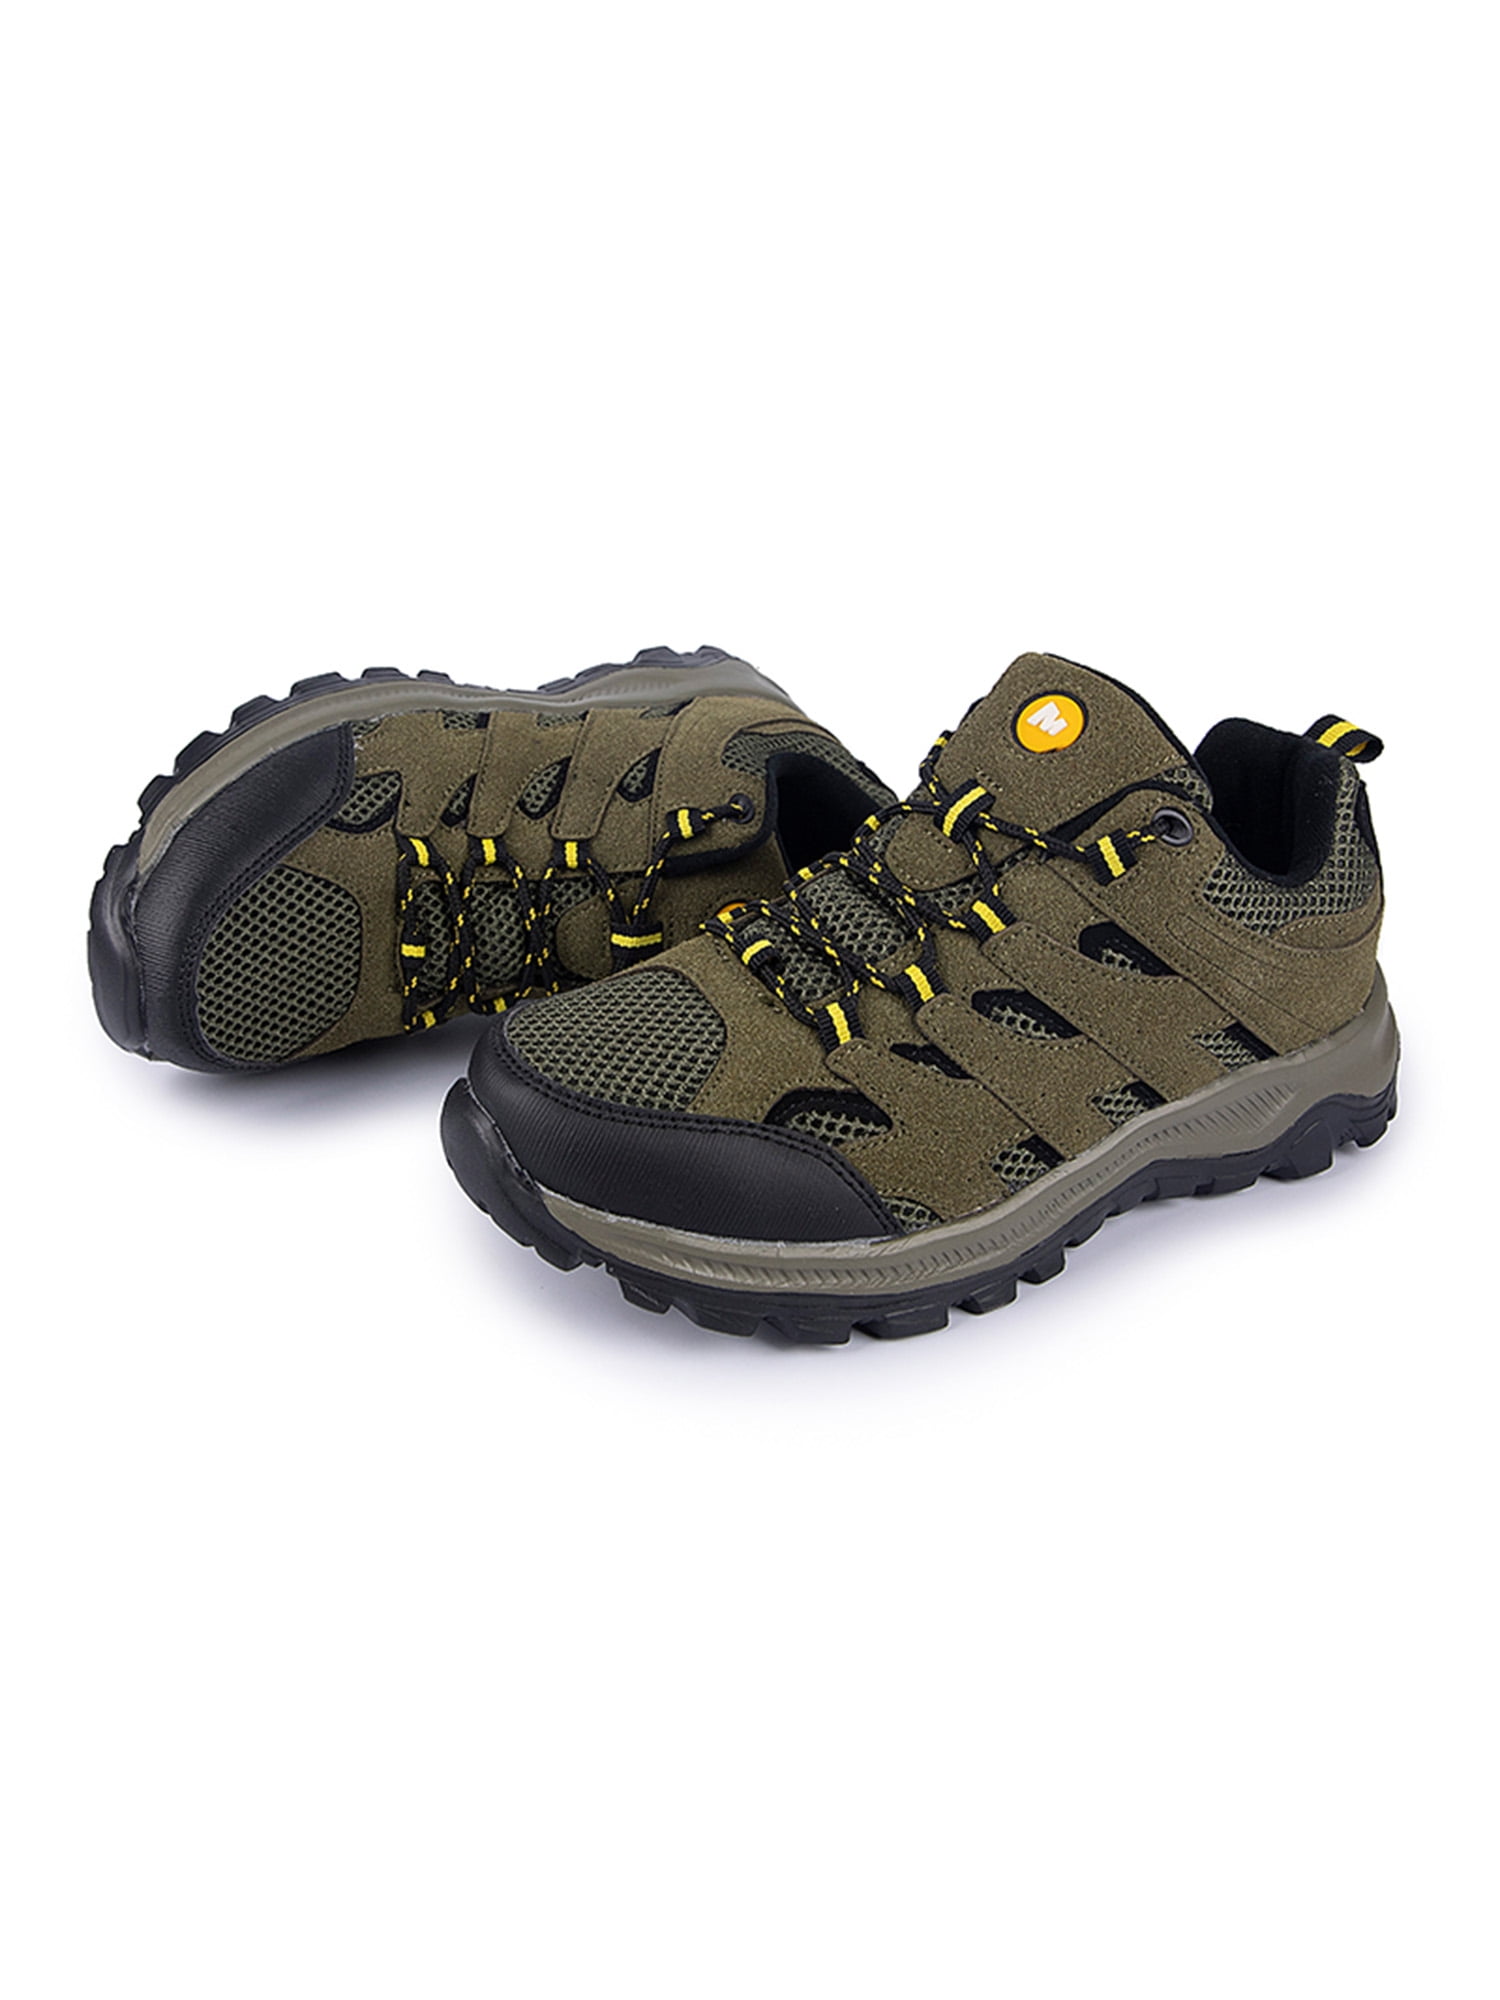 Mens Hiking Boots Breathable Lightweight Trekking Backpacking Mountaineering Boots High-Traction Grip Outdoors Hiker Boot for Men 